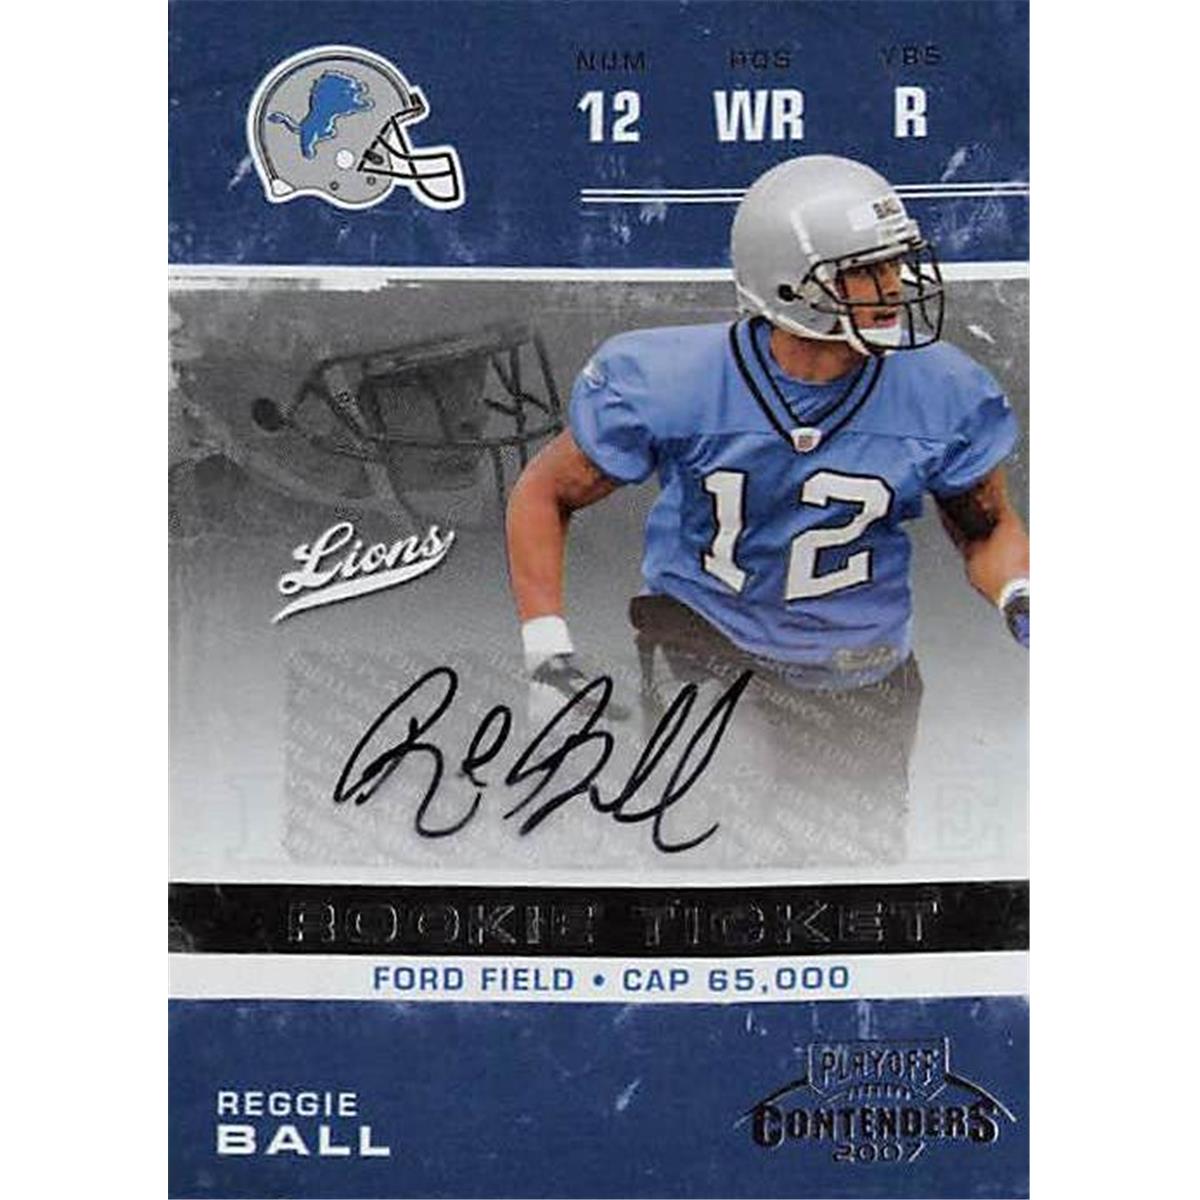 Picture of Autograph Warehouse 377939 Reggie Ball Autographed Football Card - Detroit Lions 2007 Playoff Contenders Rookie Ticket No.211